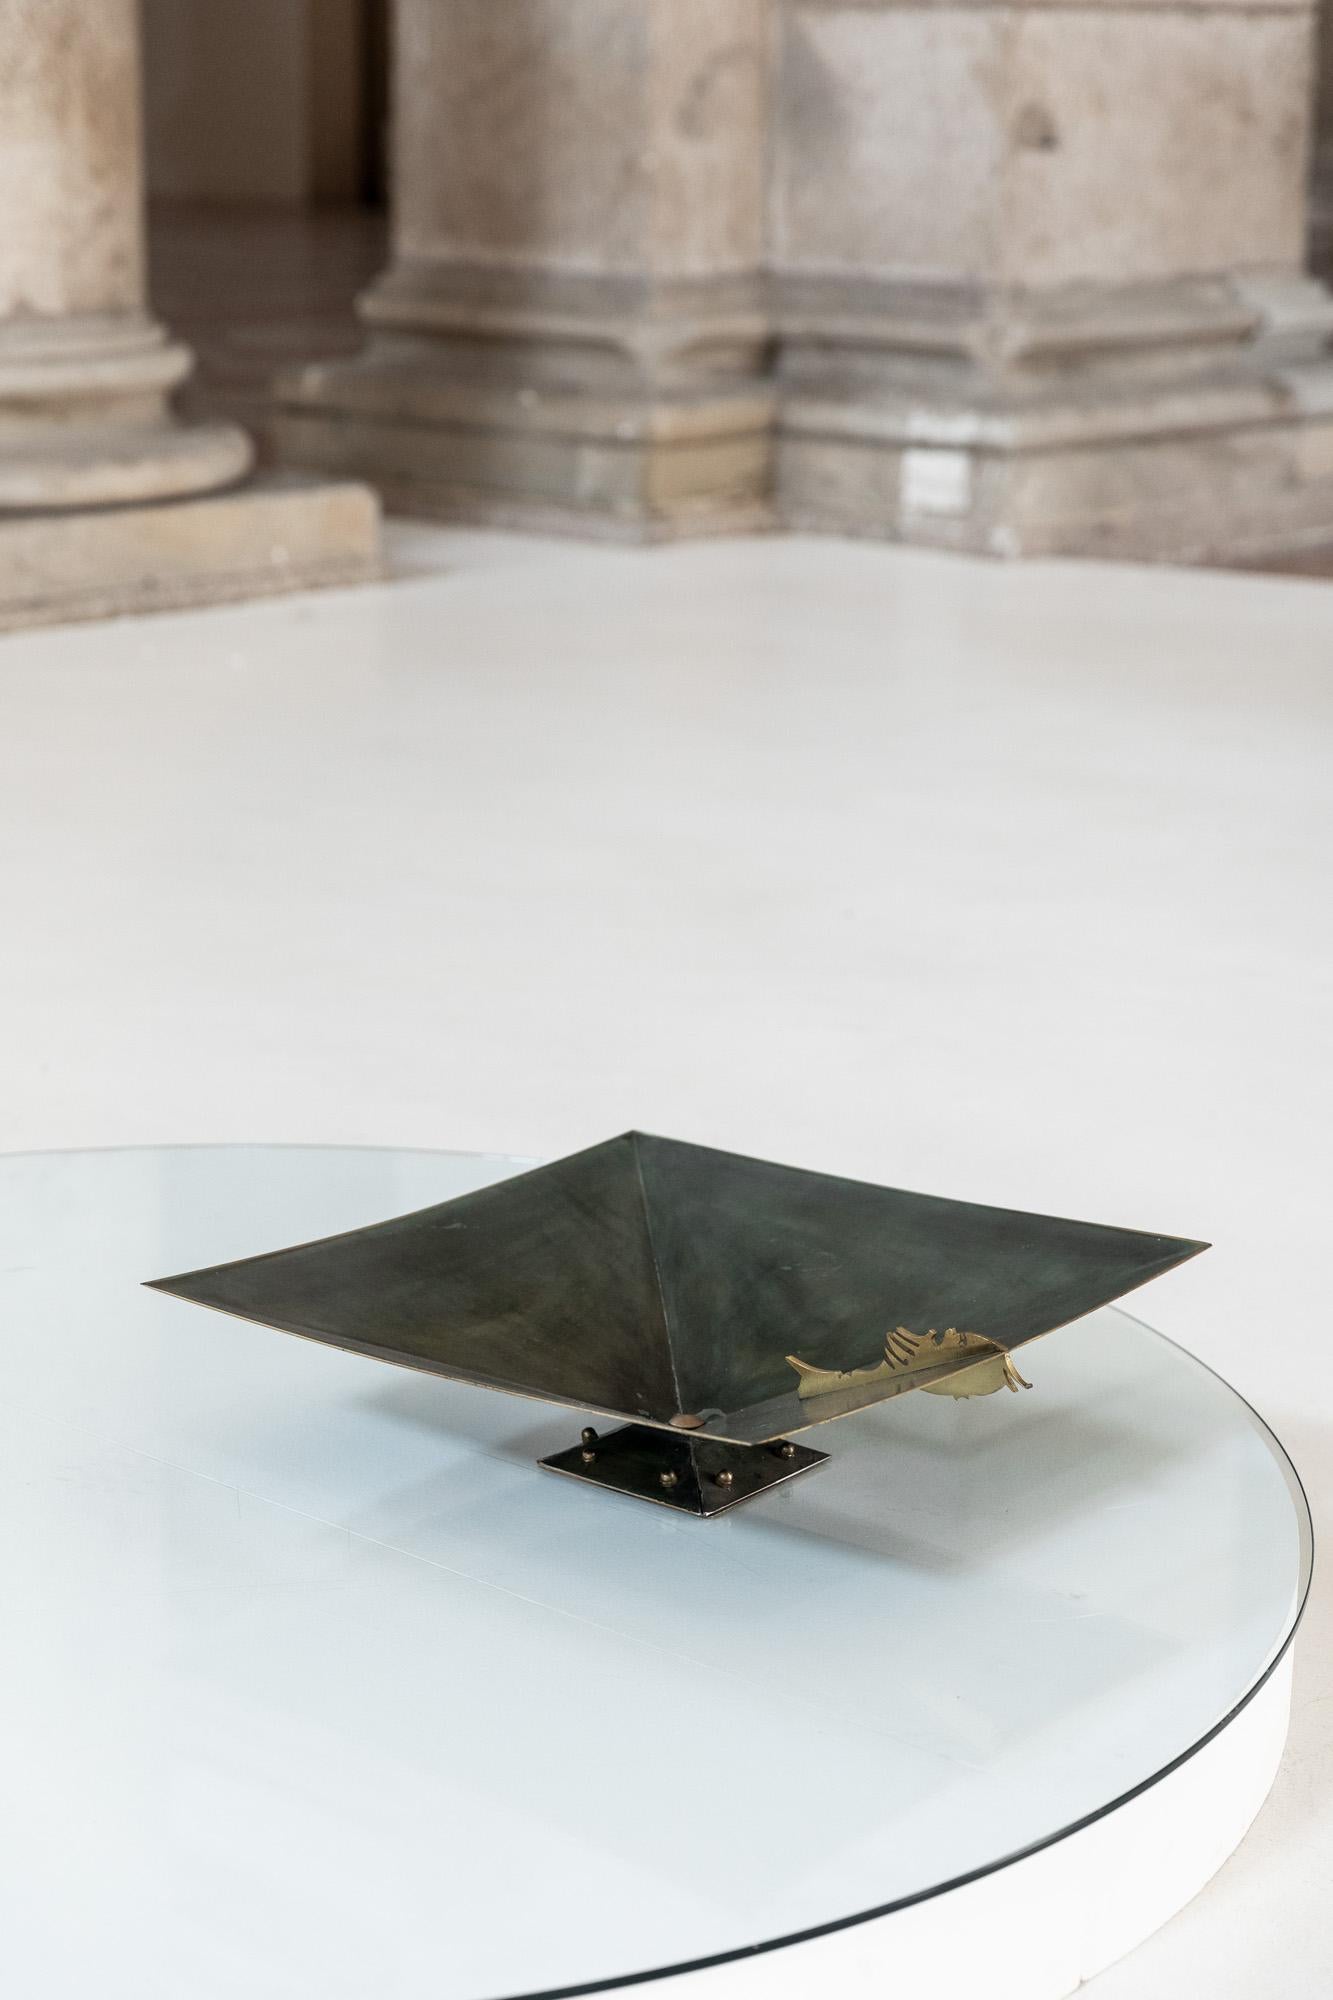 Rare centerpiece designed by Lorenzo Burchiellaro for friend's family.
Elegant squared metal sculpture with glamorous brass details.
It's published on private collection book ( photo) in Padova.
